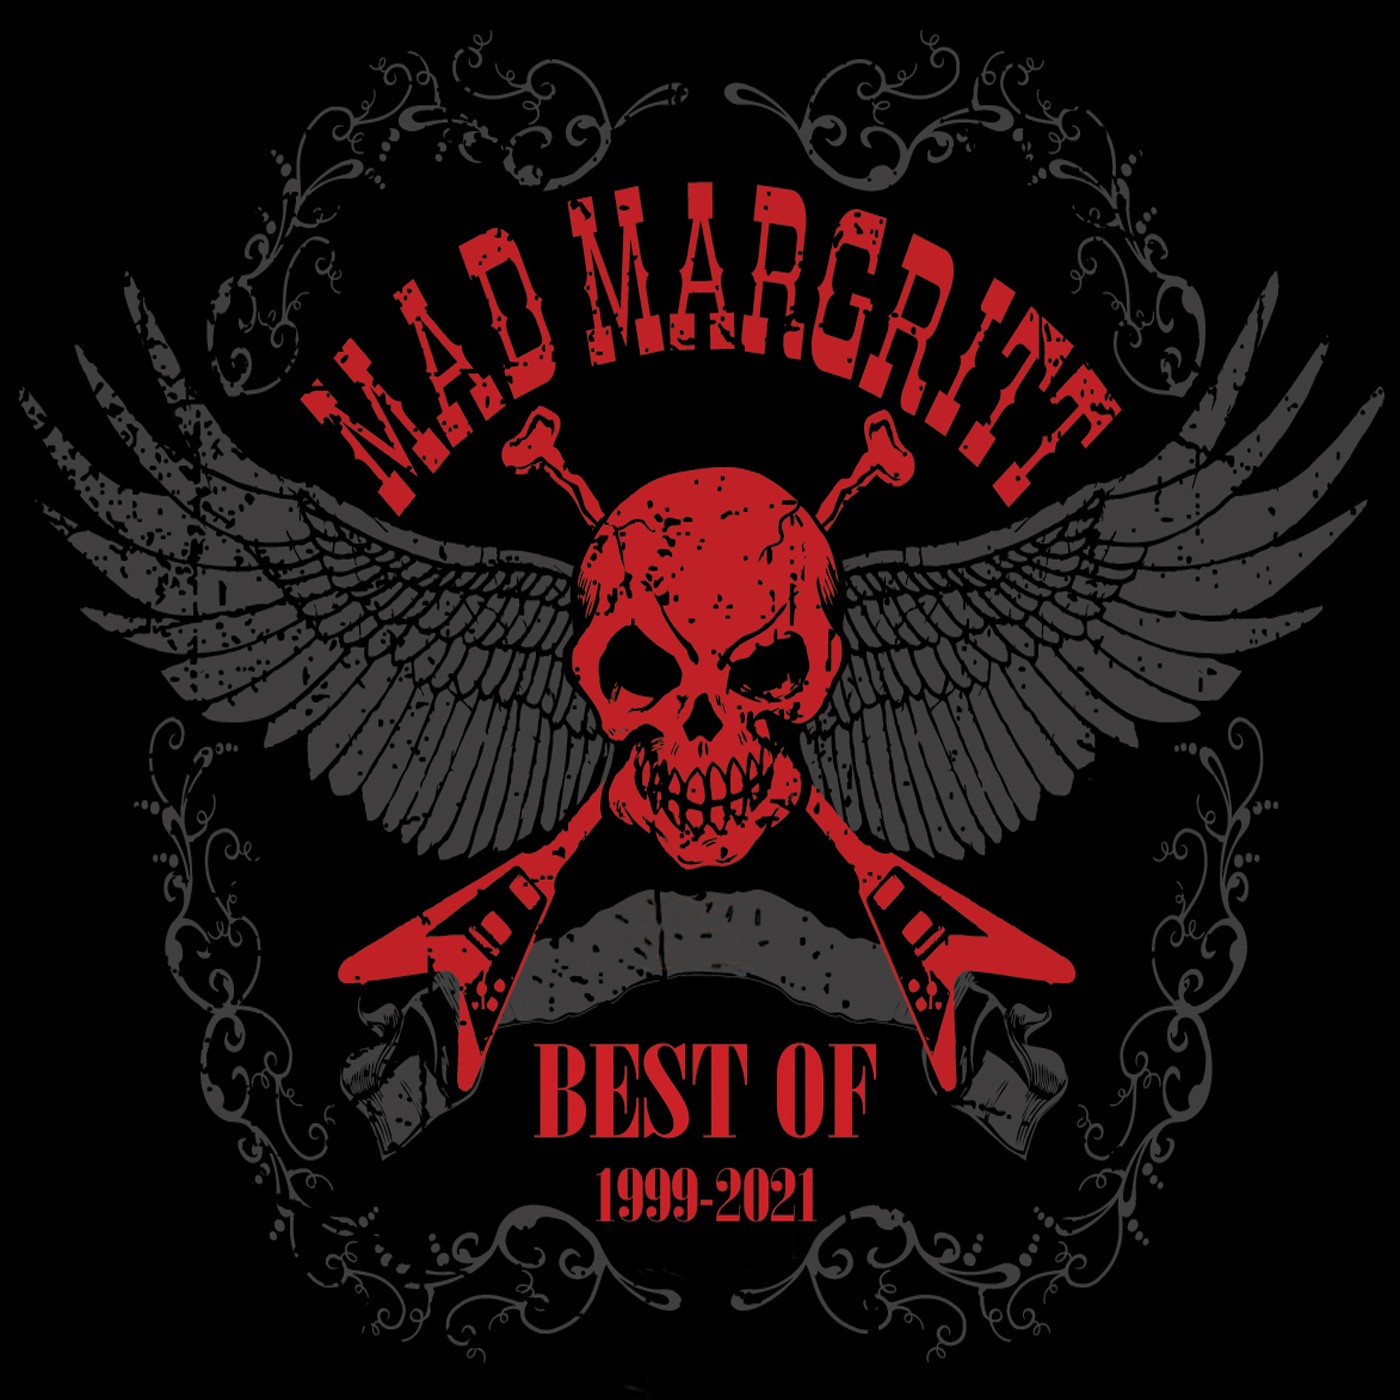 MAD MARGRITT - Best Of 1999-2021 